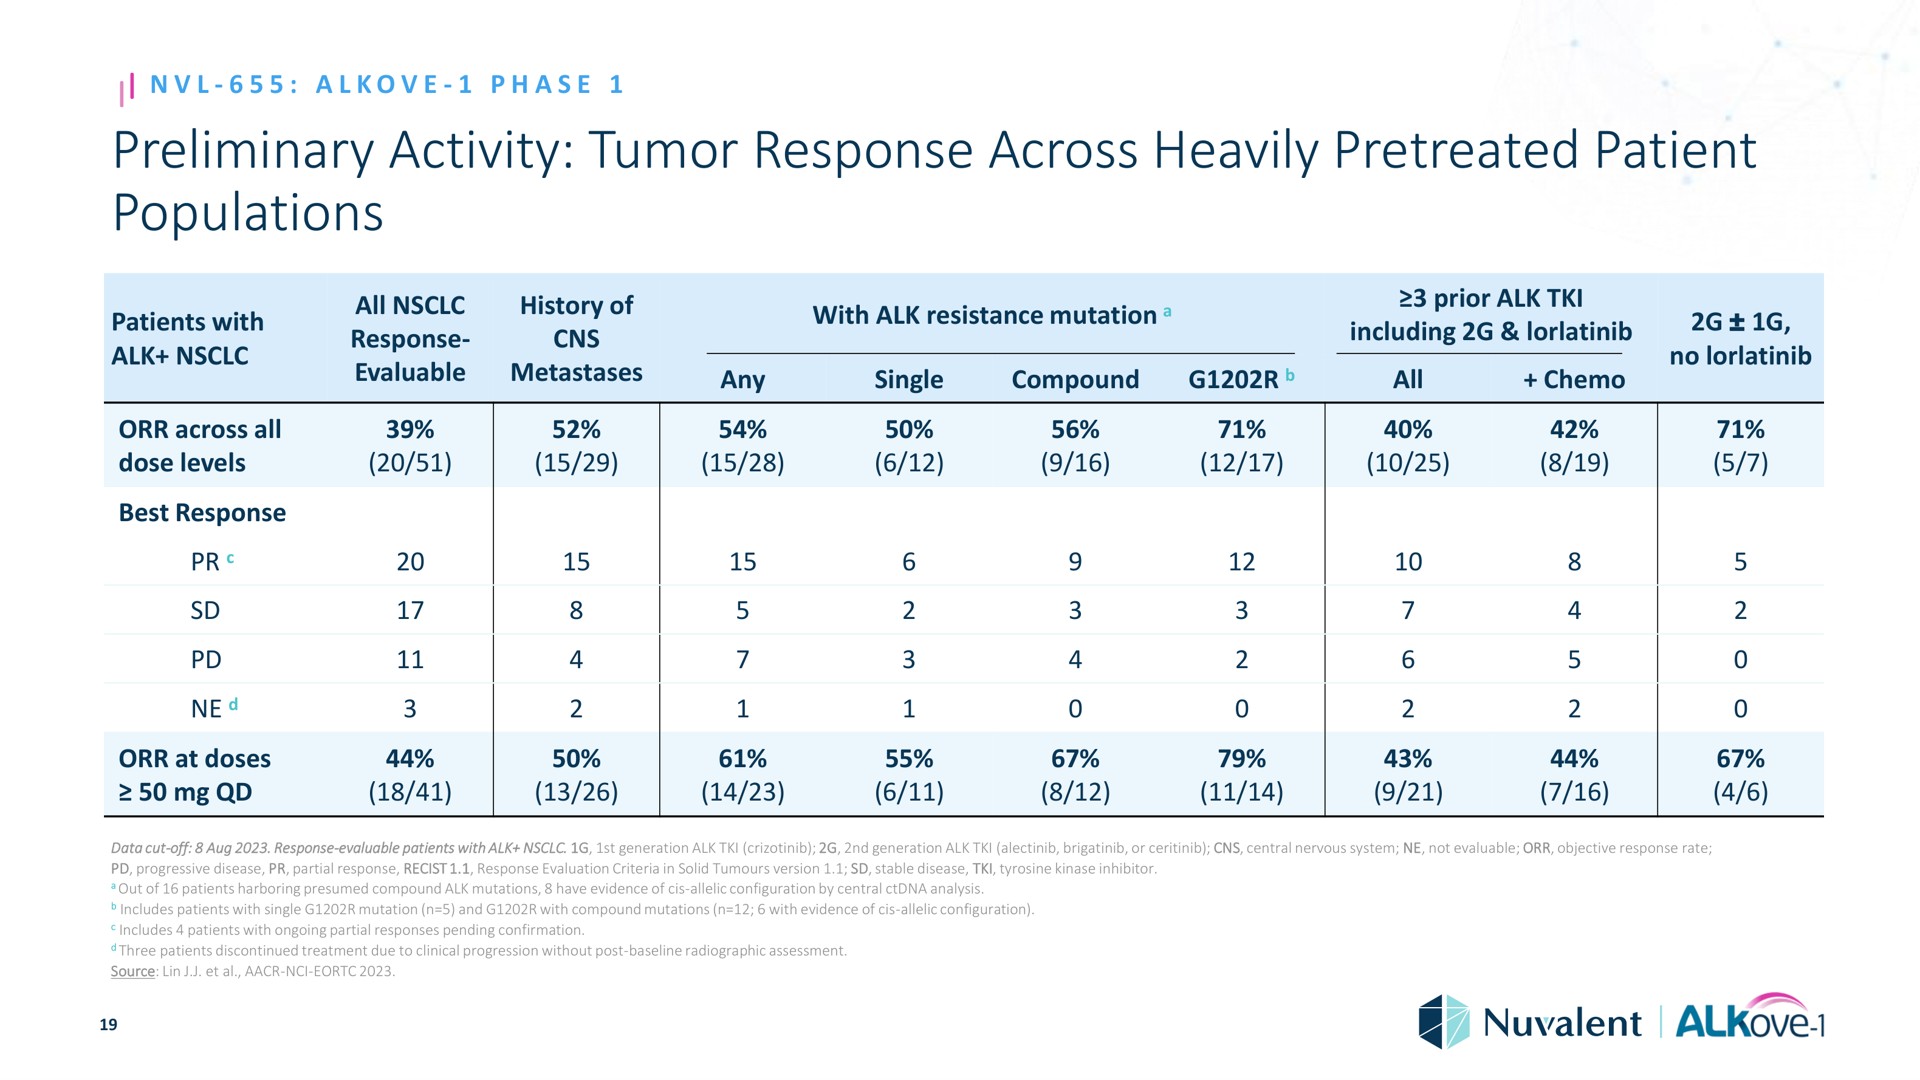 preliminary activity tumor response across heavily patient populations phase alk all dose levels best response history of evaluable metastases any with alk resistance mutation single compound i prior alk including all a no a at doses data cut off mania with alk or central nervous system not evaluable objective rate tyrosine kinase inhibitor source lin | Nuvalent